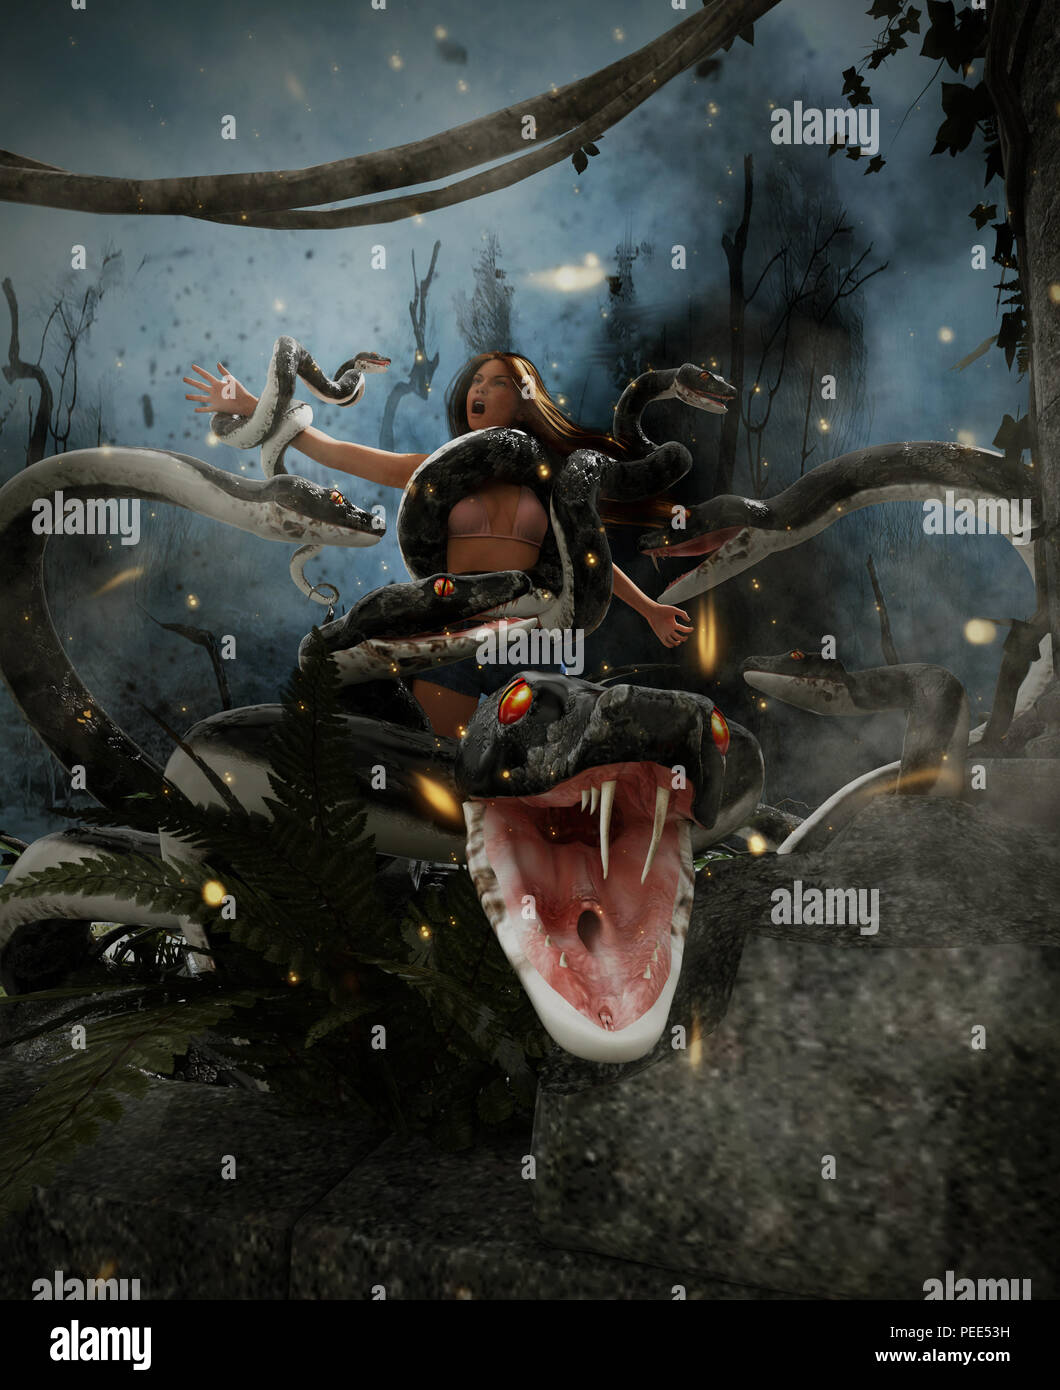 Giant fantasy snake attack a woman,3d Mixed media for book illustration or book cover Stock Photo